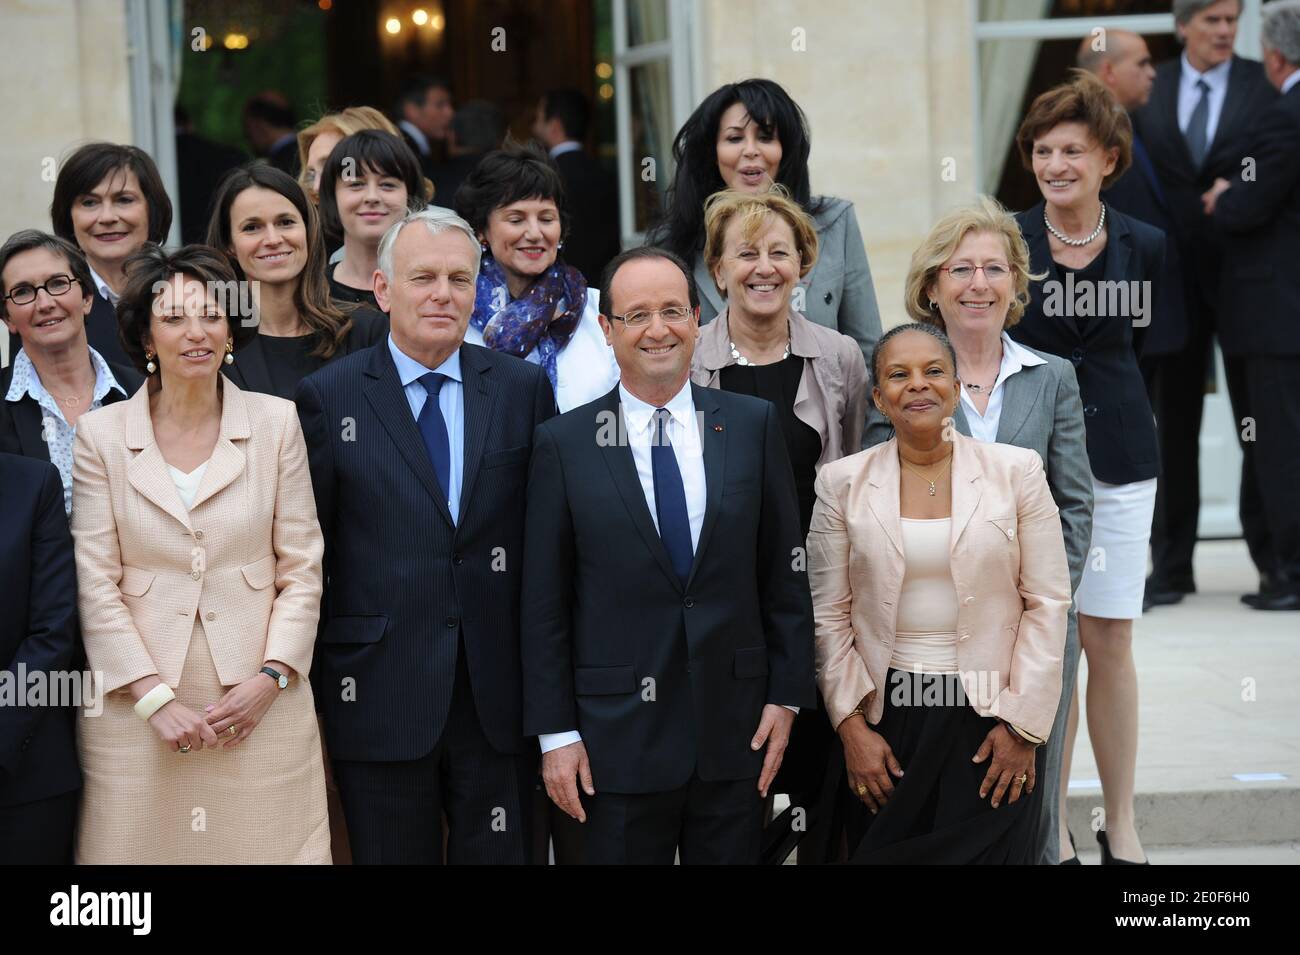 Family picture of the newly appointed women of the French government taken on May 17, 2012 at the Elysee Palace in Paris. (L-Health M, Marisol Touraine; Prime Minister, Jean-Marc Ayrault; French President Francois Hollande; and Justice M, Christiane Taubira. 2nd row - Sports M, Valerie Fourneyron; M for Culture, Aurelie Filippetti; M for State Reform, Marylise Lebranchu; M for Higher Education and Research, Geneviève Fioraso. 3rd row - JM for Disabled People, Marie-Arlette Carlotti; M for Ecology, Nicole Bricq (Hidden); JM for Handicraft, Sylvia Pinel; JM for Family, Dominique Bertinotti; JM f Stock Photo